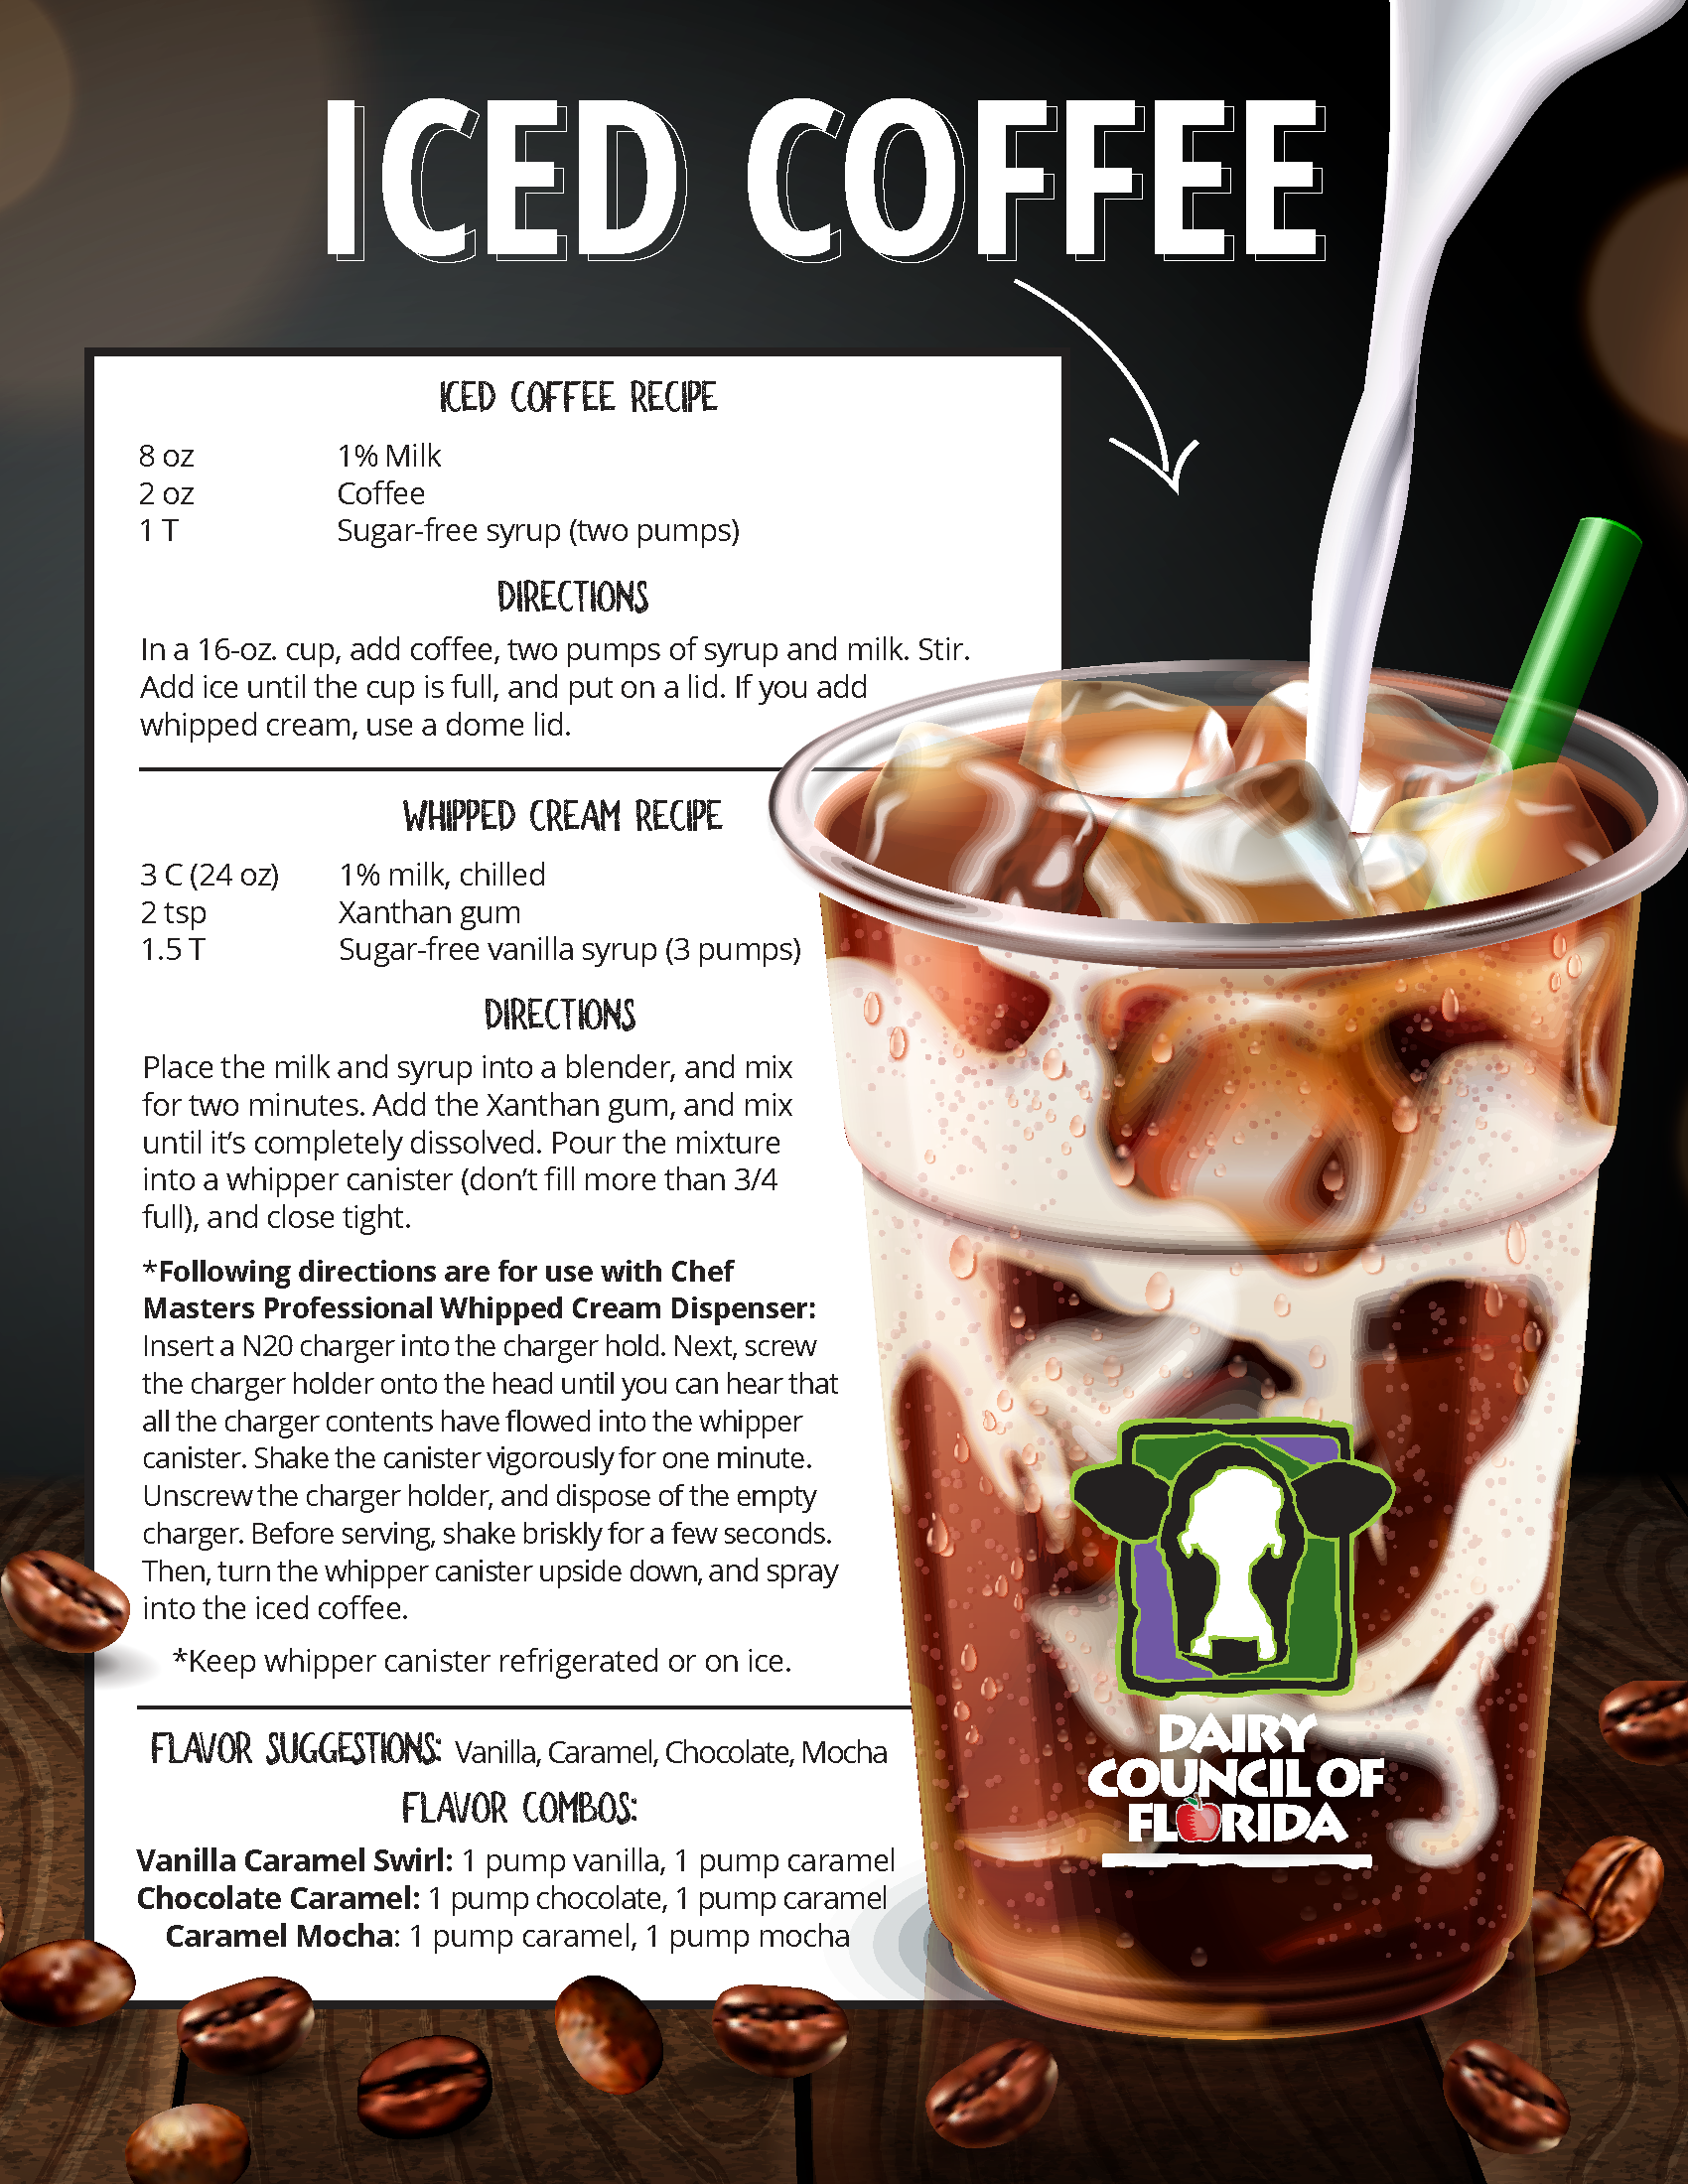 https://www.floridamilk.com/_resources/images/in-the-school/schools-recipes/Iced-Coffee-Serving-Amounts.png